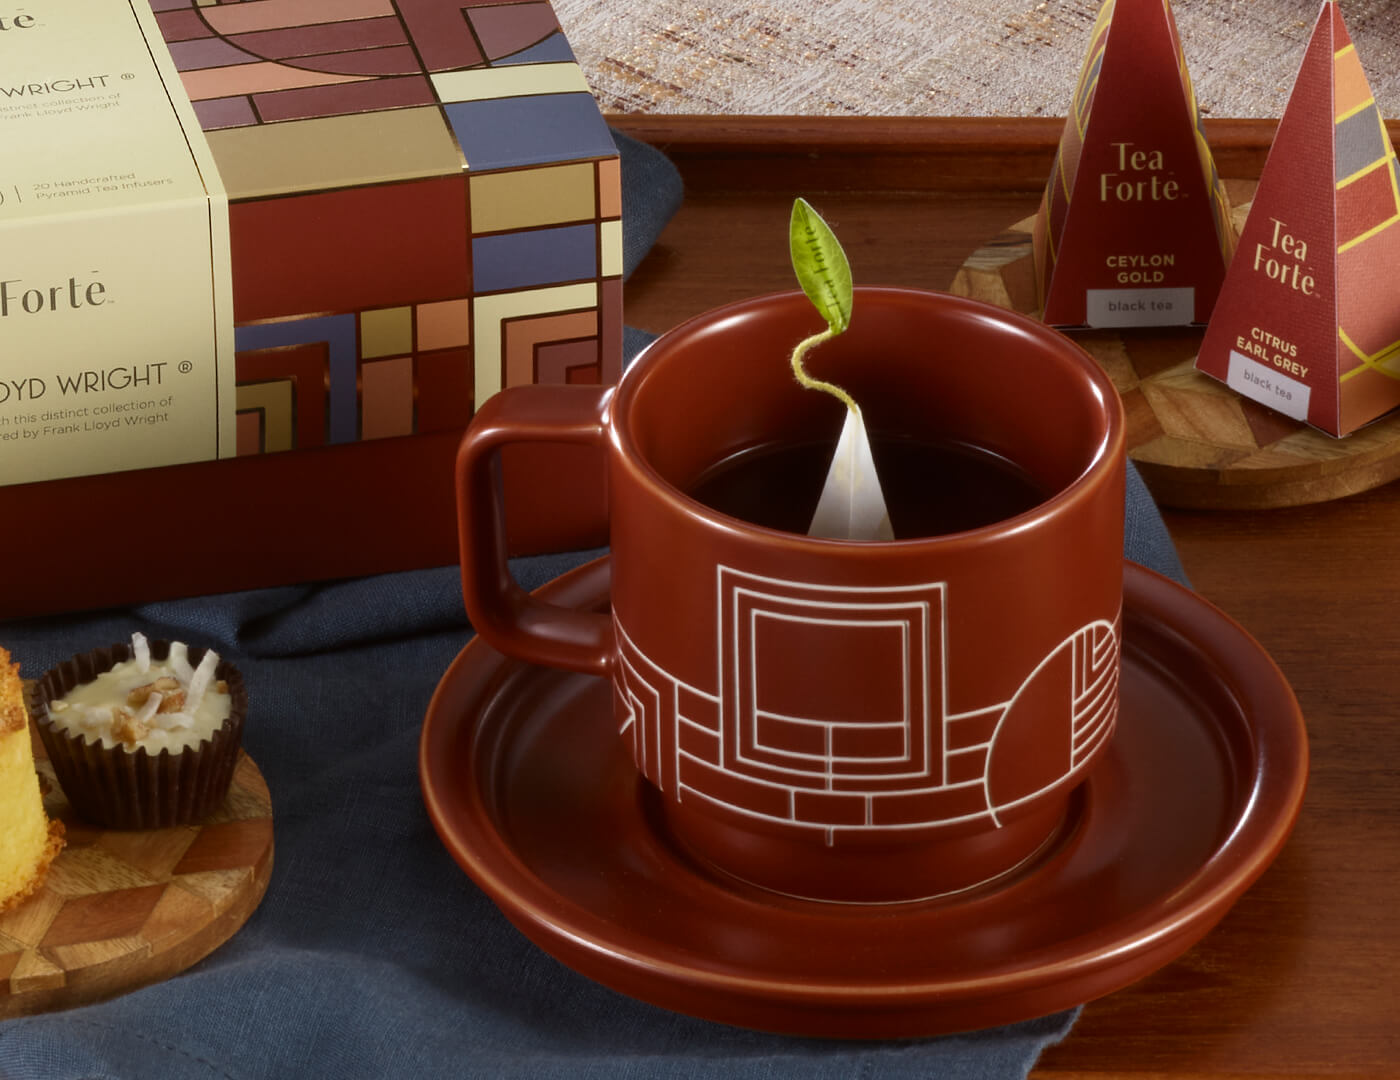 Terra stoneware teacup and saucer on a table with the Frank Lloyd Wright tea collection, desserts and pyramid tea infusers